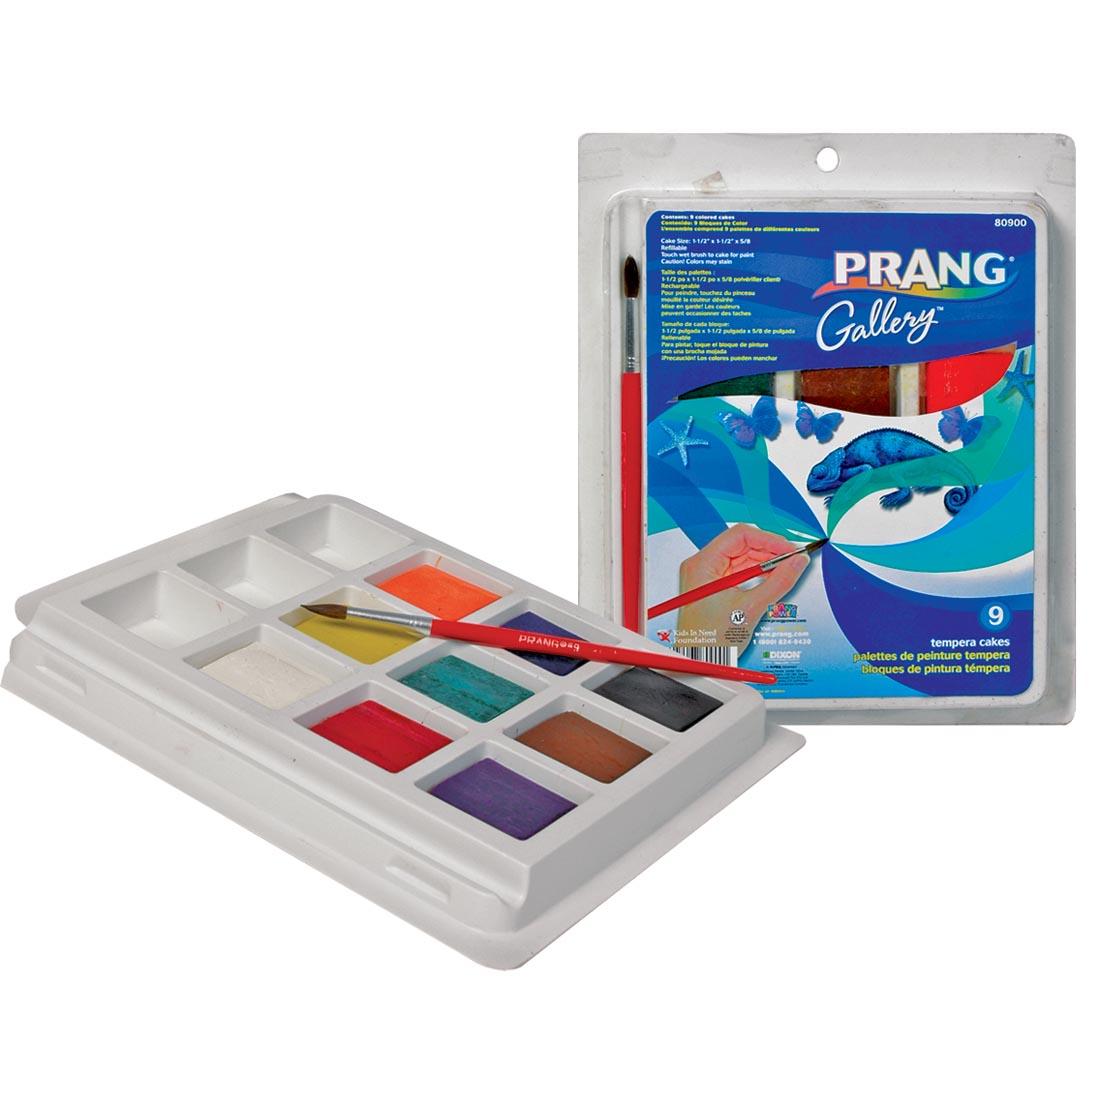 Prang Gallery Tempera Cakes and Brush Shown Beside Their Package